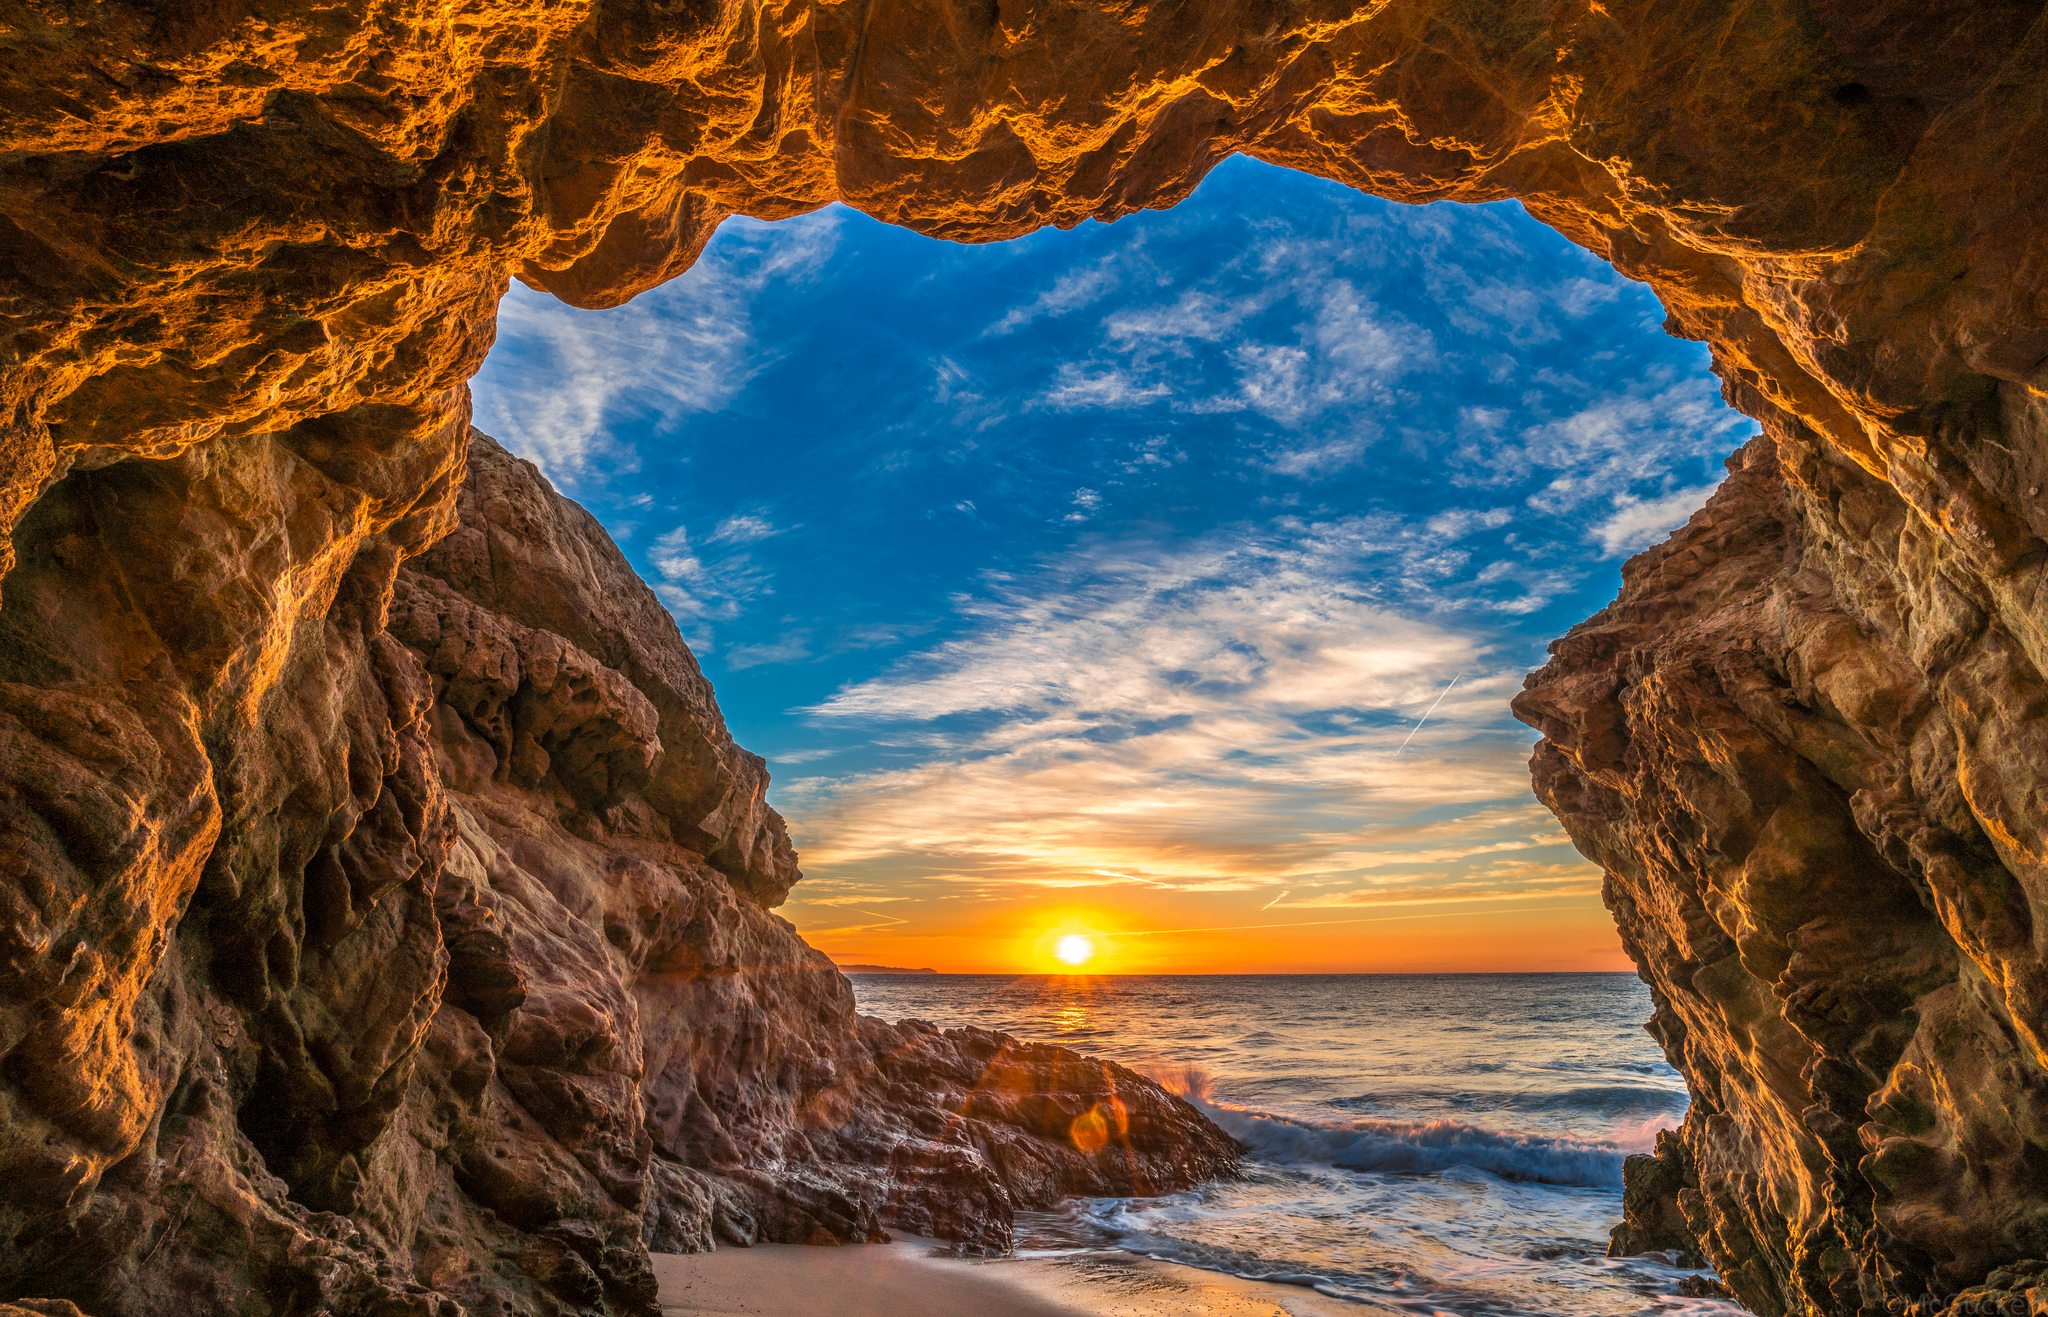 Cave Sunset Sea Hd Nature 4k Wallpapers Images Backgrounds Photos Images